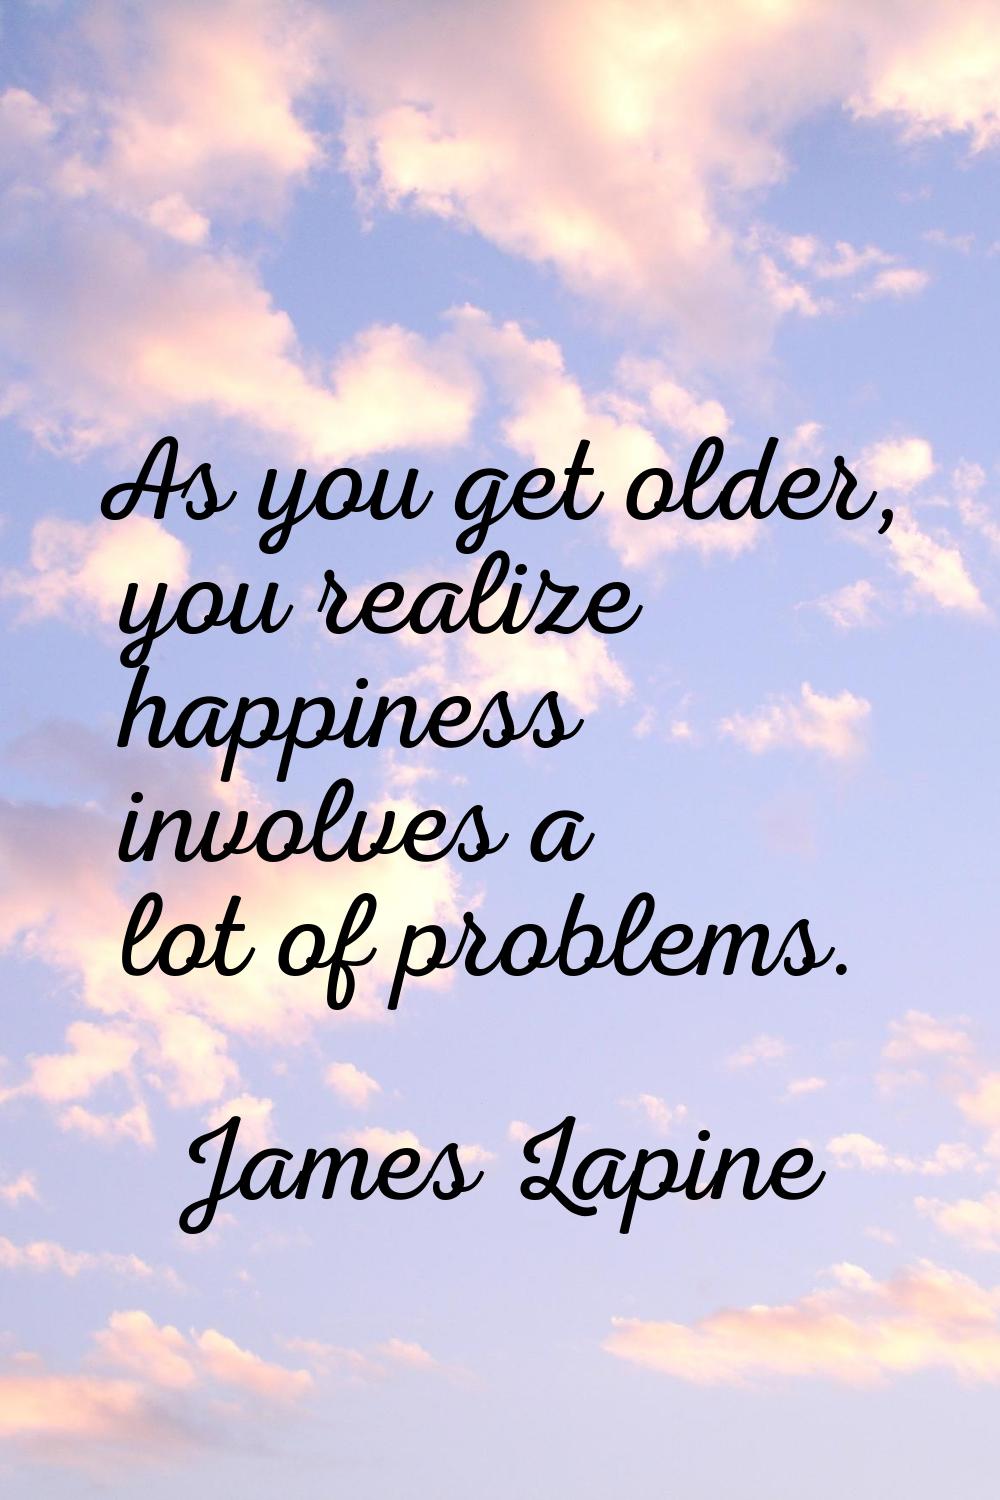 As you get older, you realize happiness involves a lot of problems.